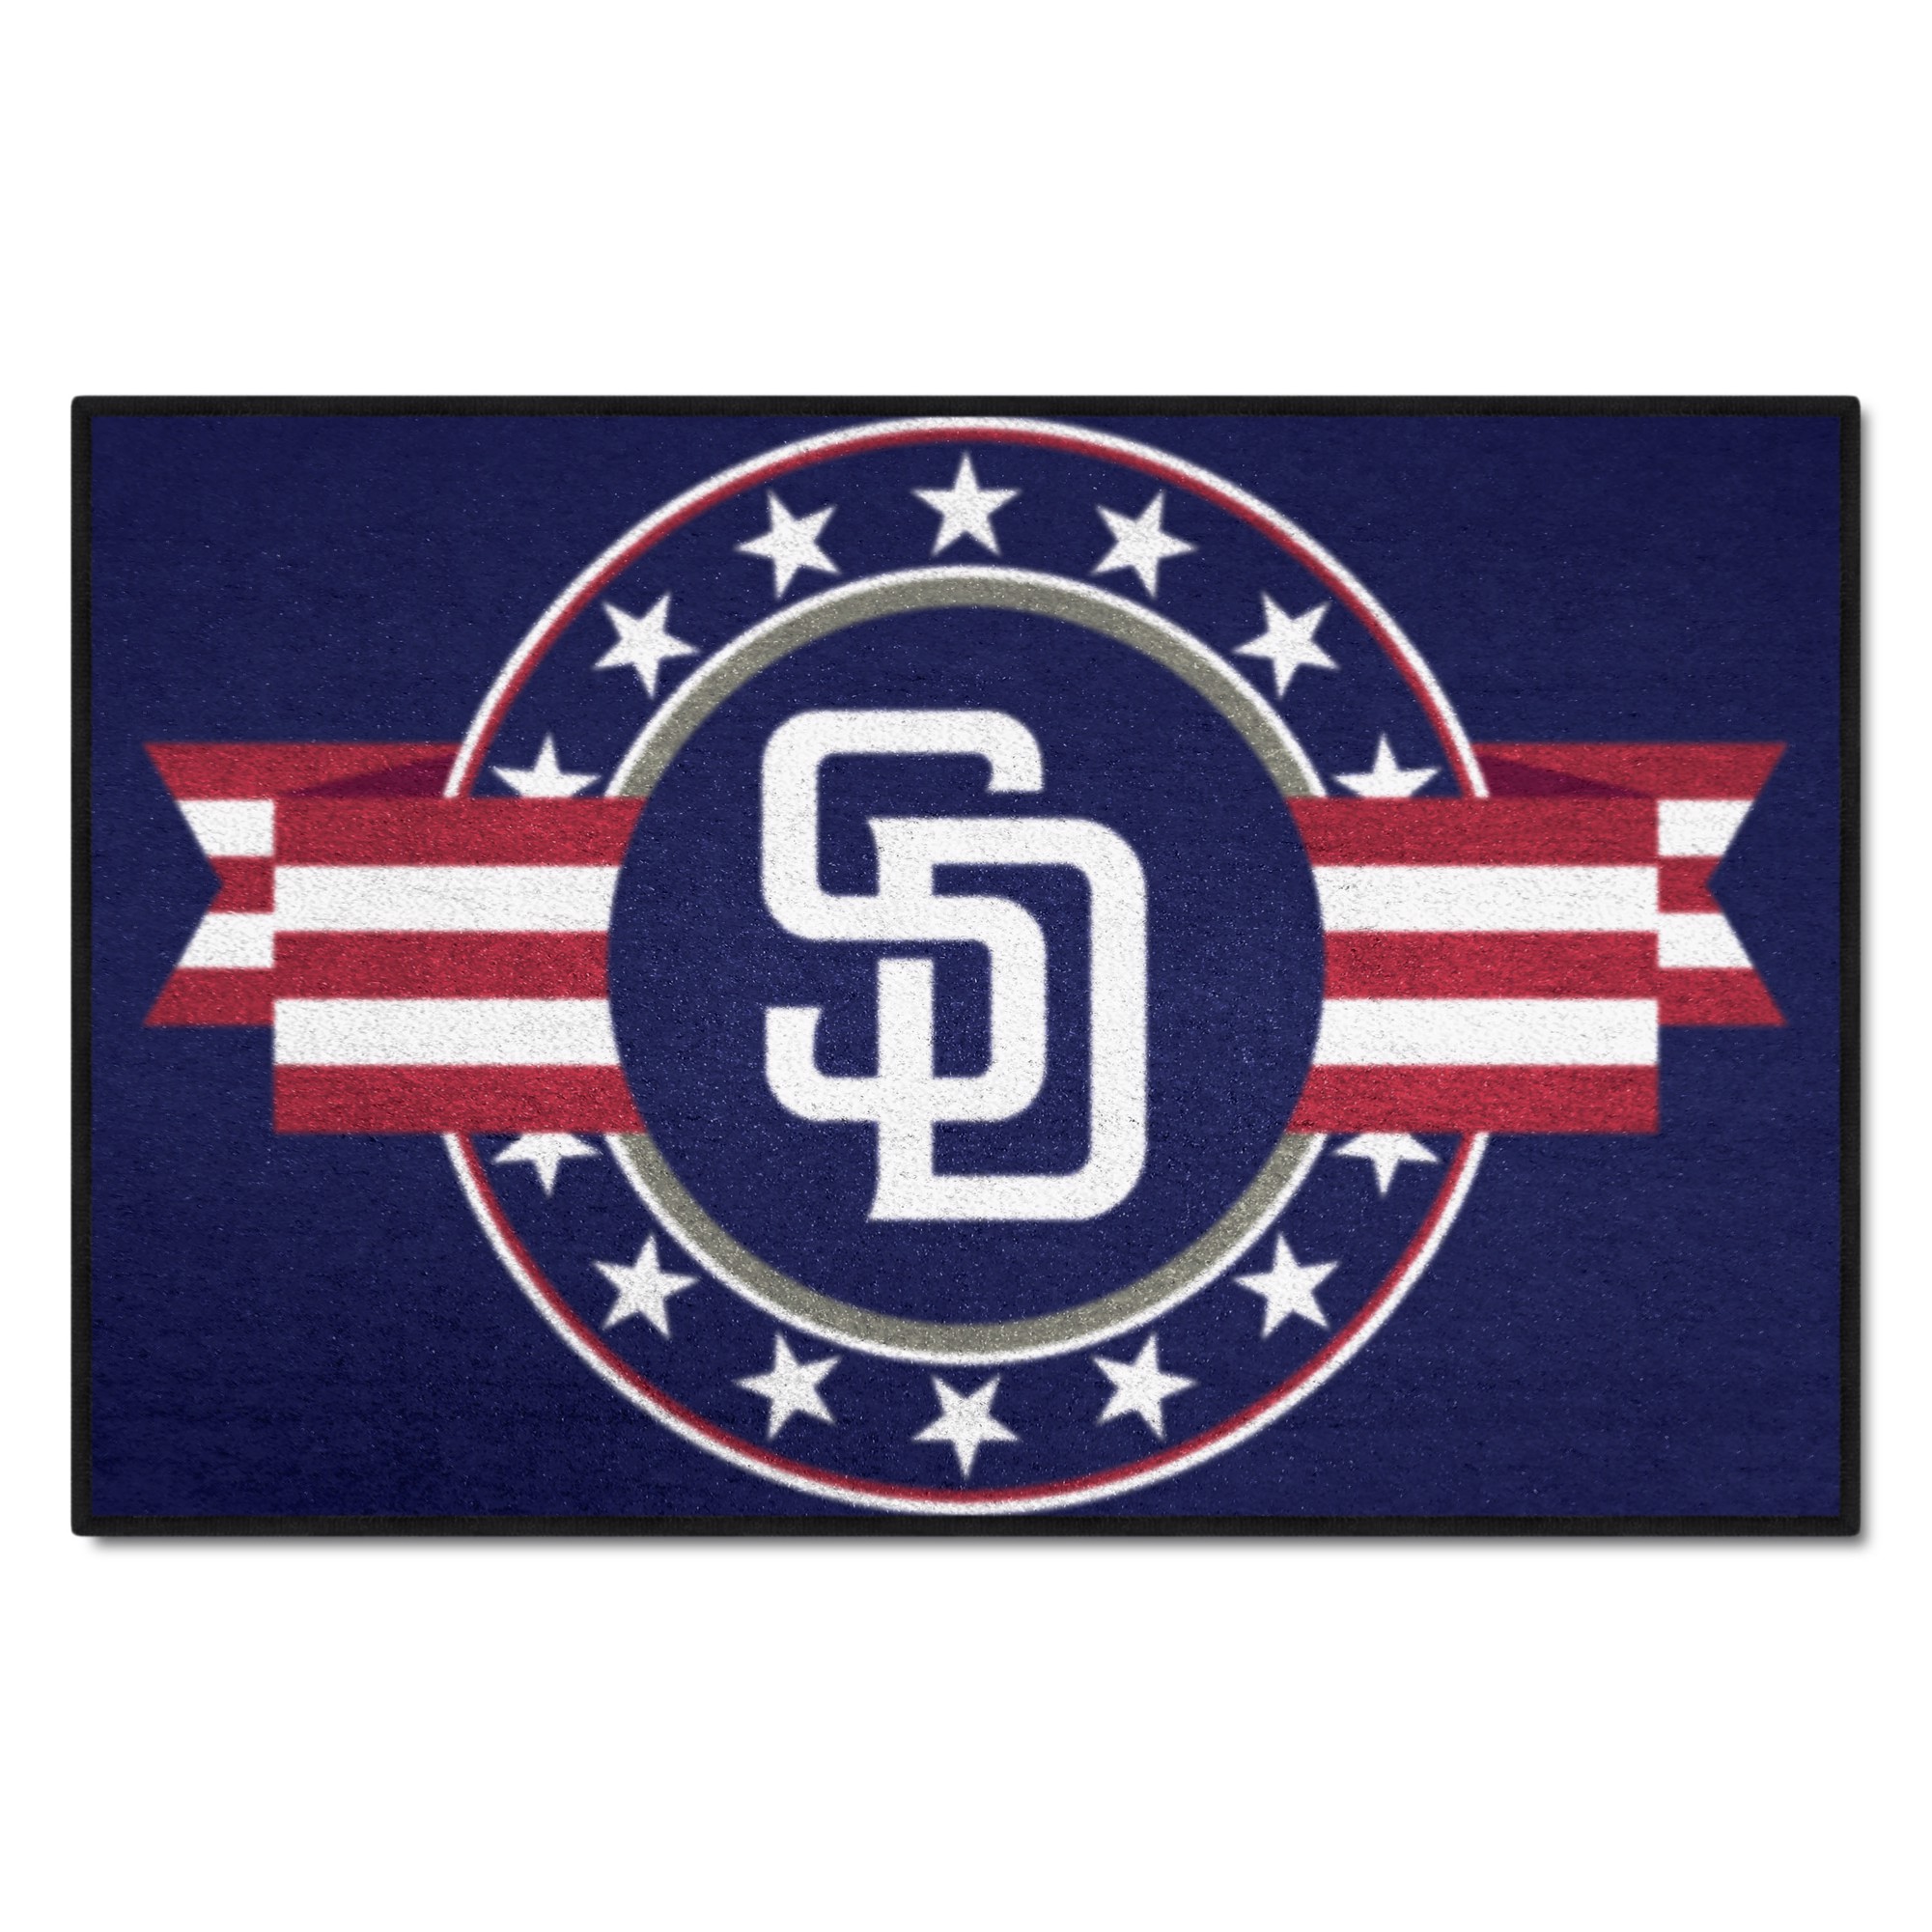 Officially Licensed MLB San Diego Padres Uniform Mat 19 x 30